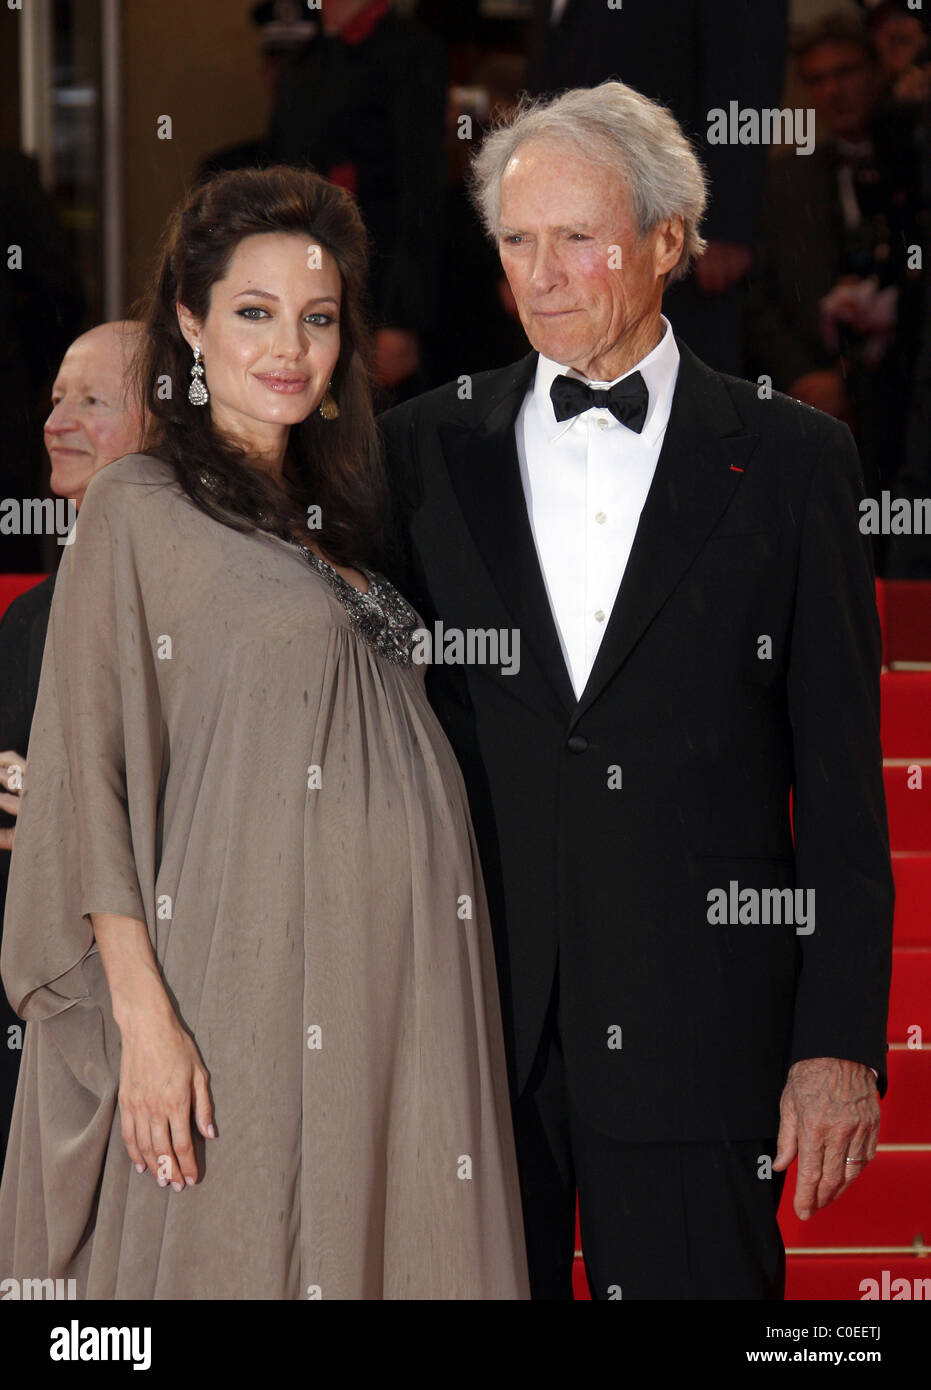 Angelina Jolie and Clint Eastwood The 2008 Cannes Film Festival - Day 7  'The Changeling' - Premiere Cannes, France - 20.05.08 Stock Photo - Alamy